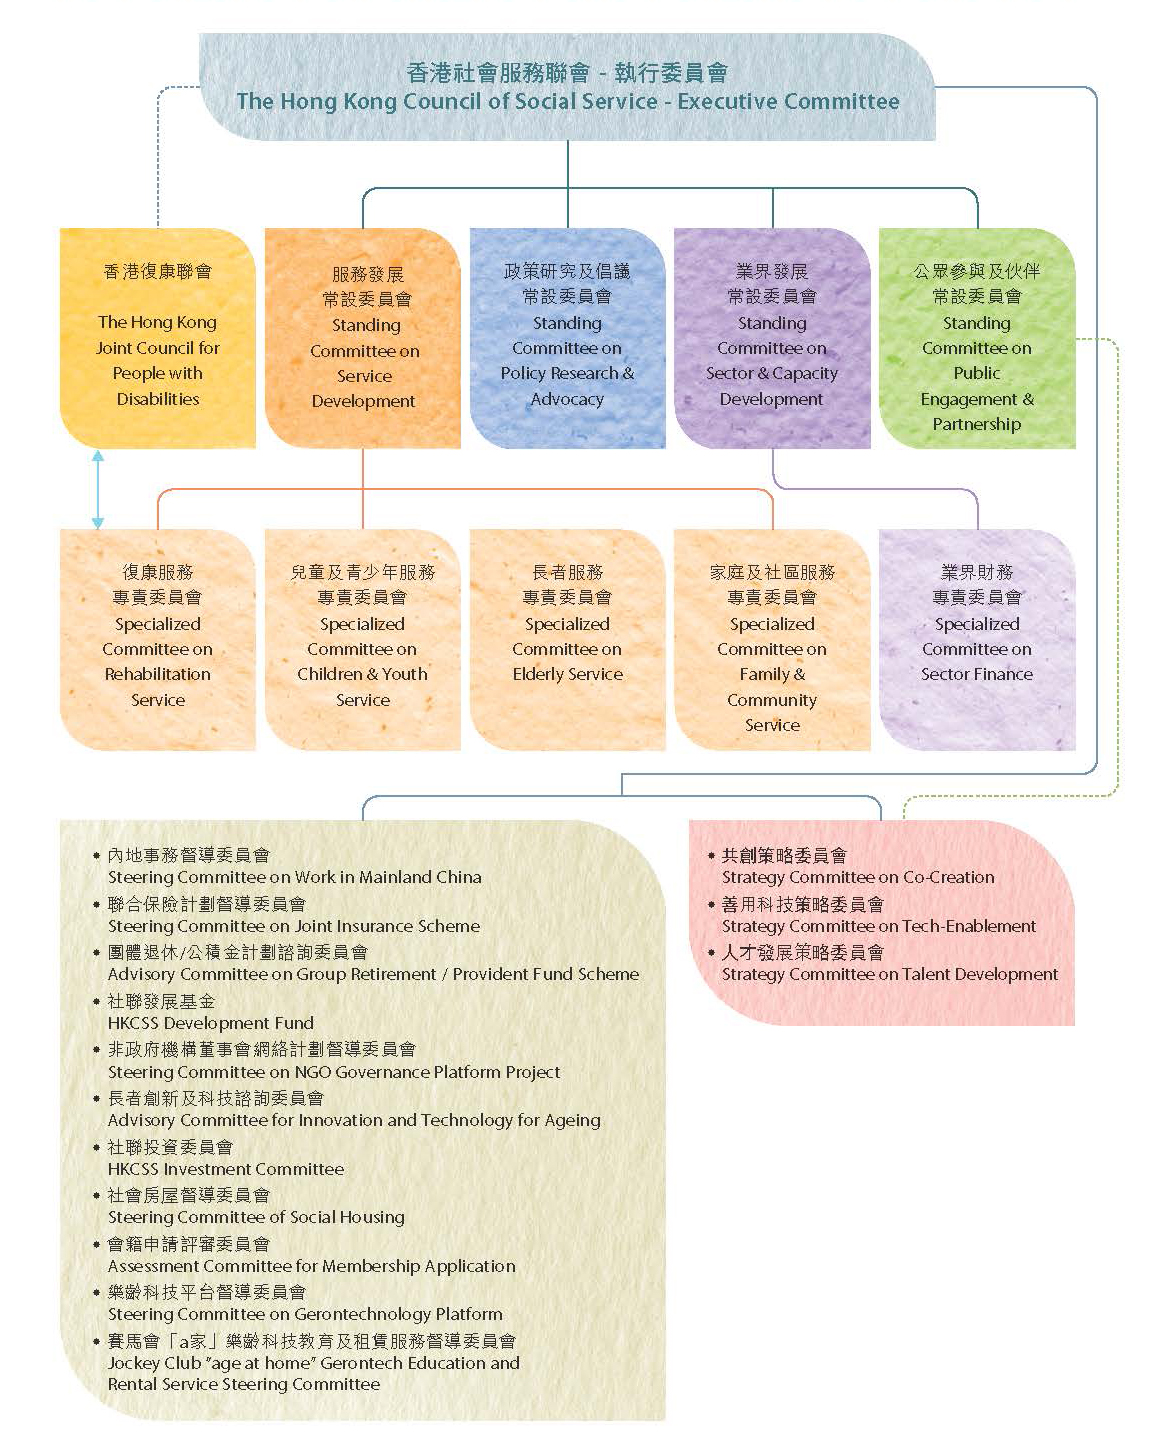 Governing Committees of HKCSS